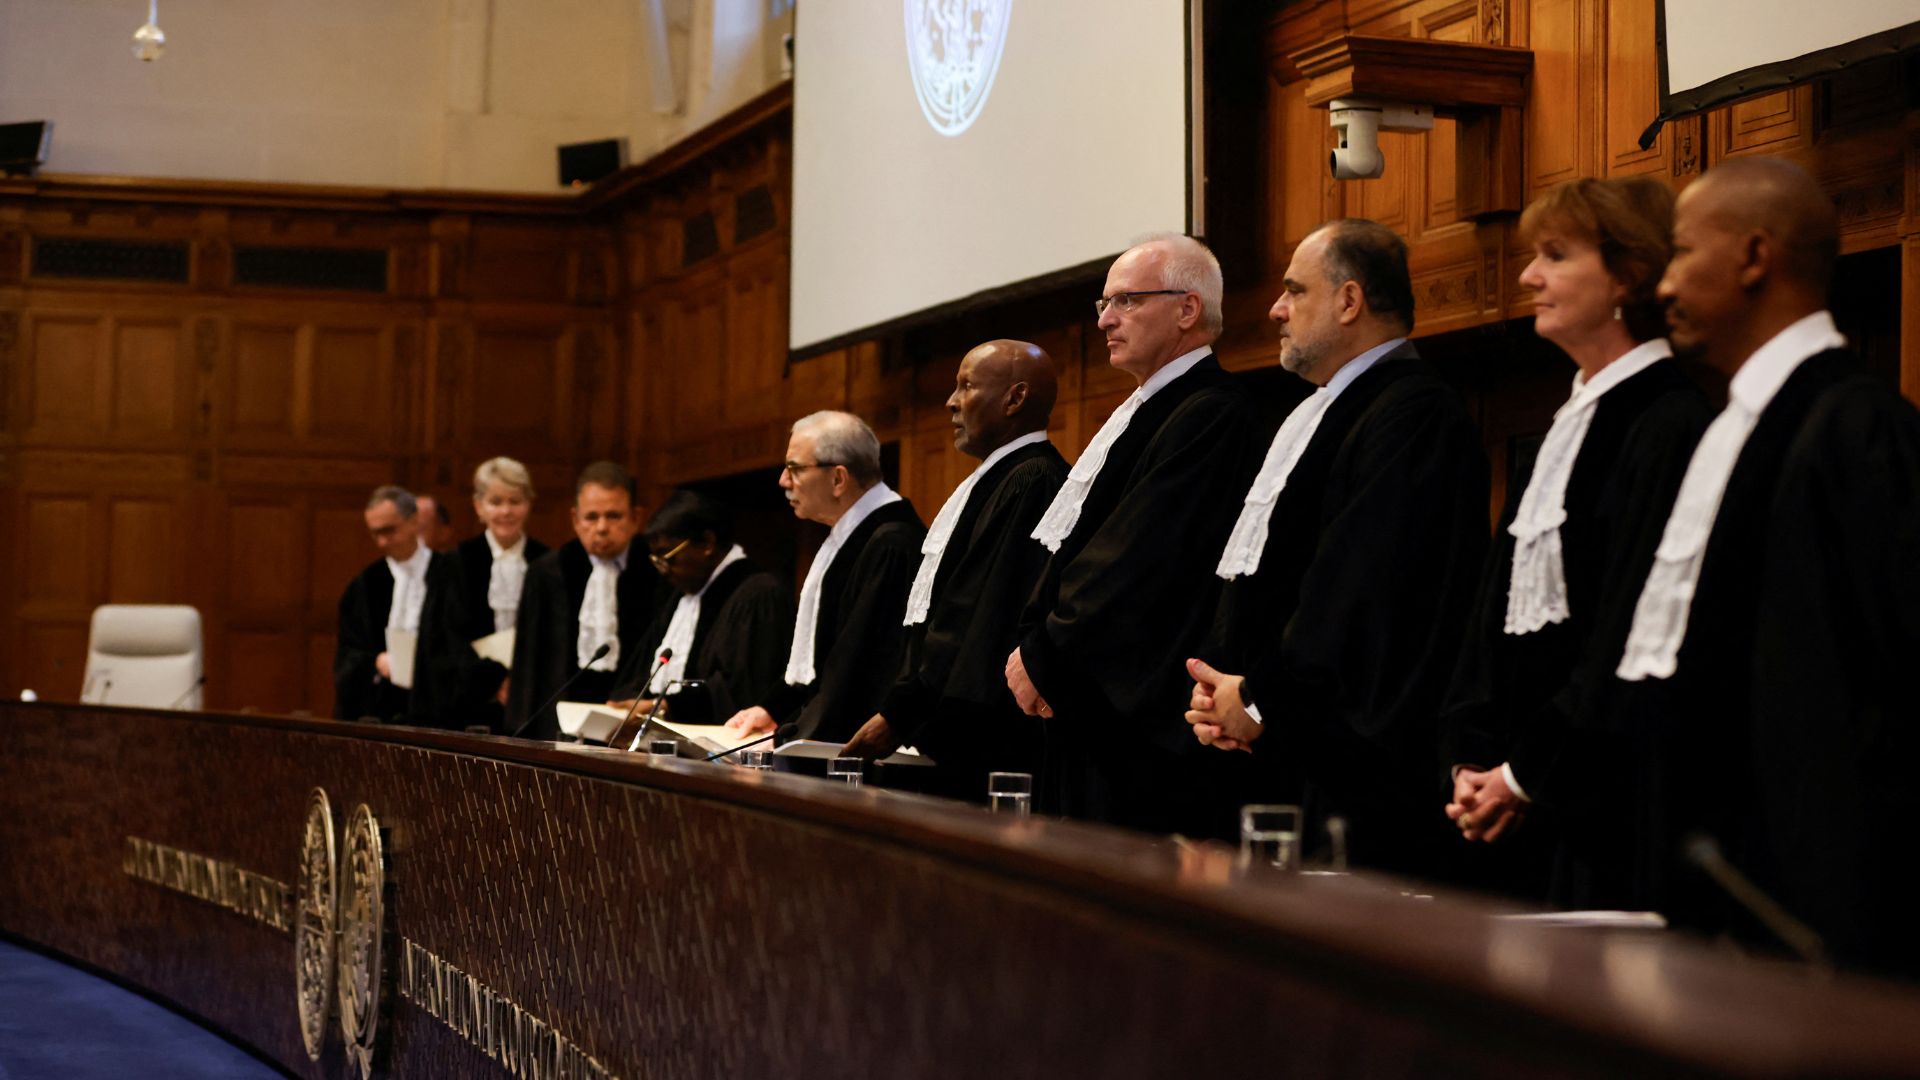 ICJ president Judge Nawaf Salam presides during a ruling on South Africa's request to order a halt to Israel's Rafah offensive in Gaza. /Johanna Geron/Reuters